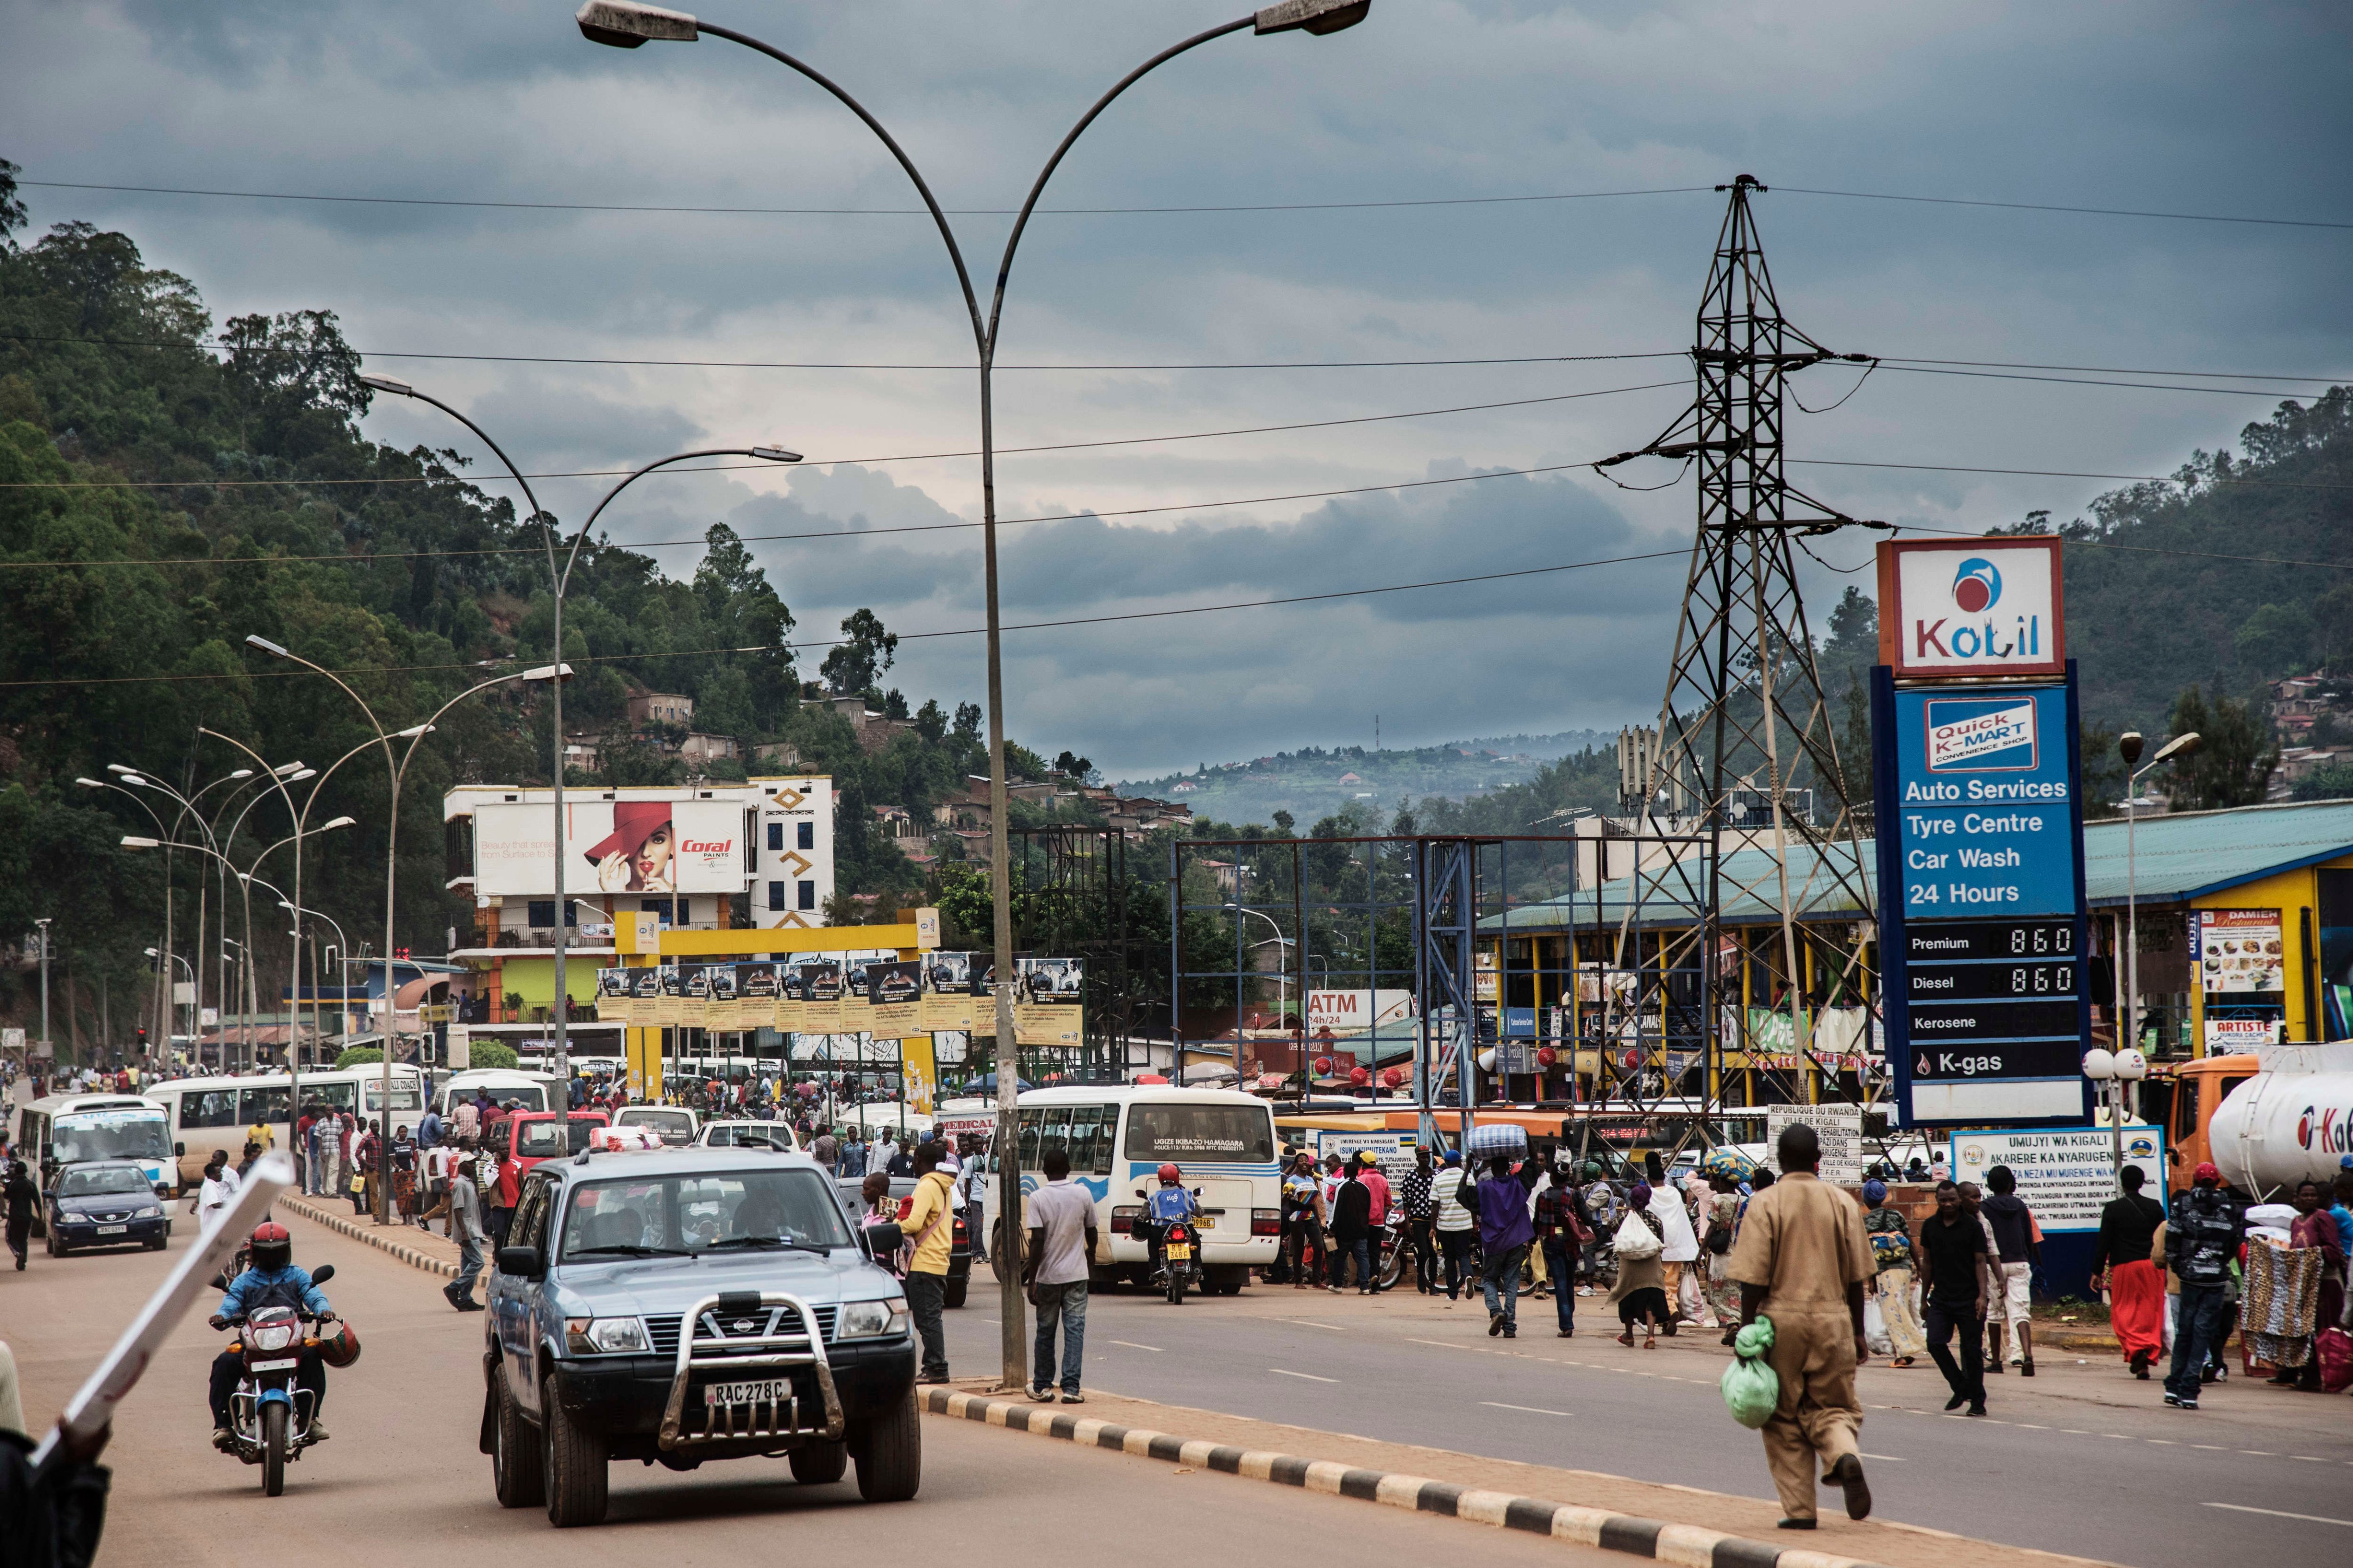 A busy district in Kigali, Rwanda, where pedestrians can come in close proximity to traffic. (Thierry Falise—LightRocket via Getty Images)